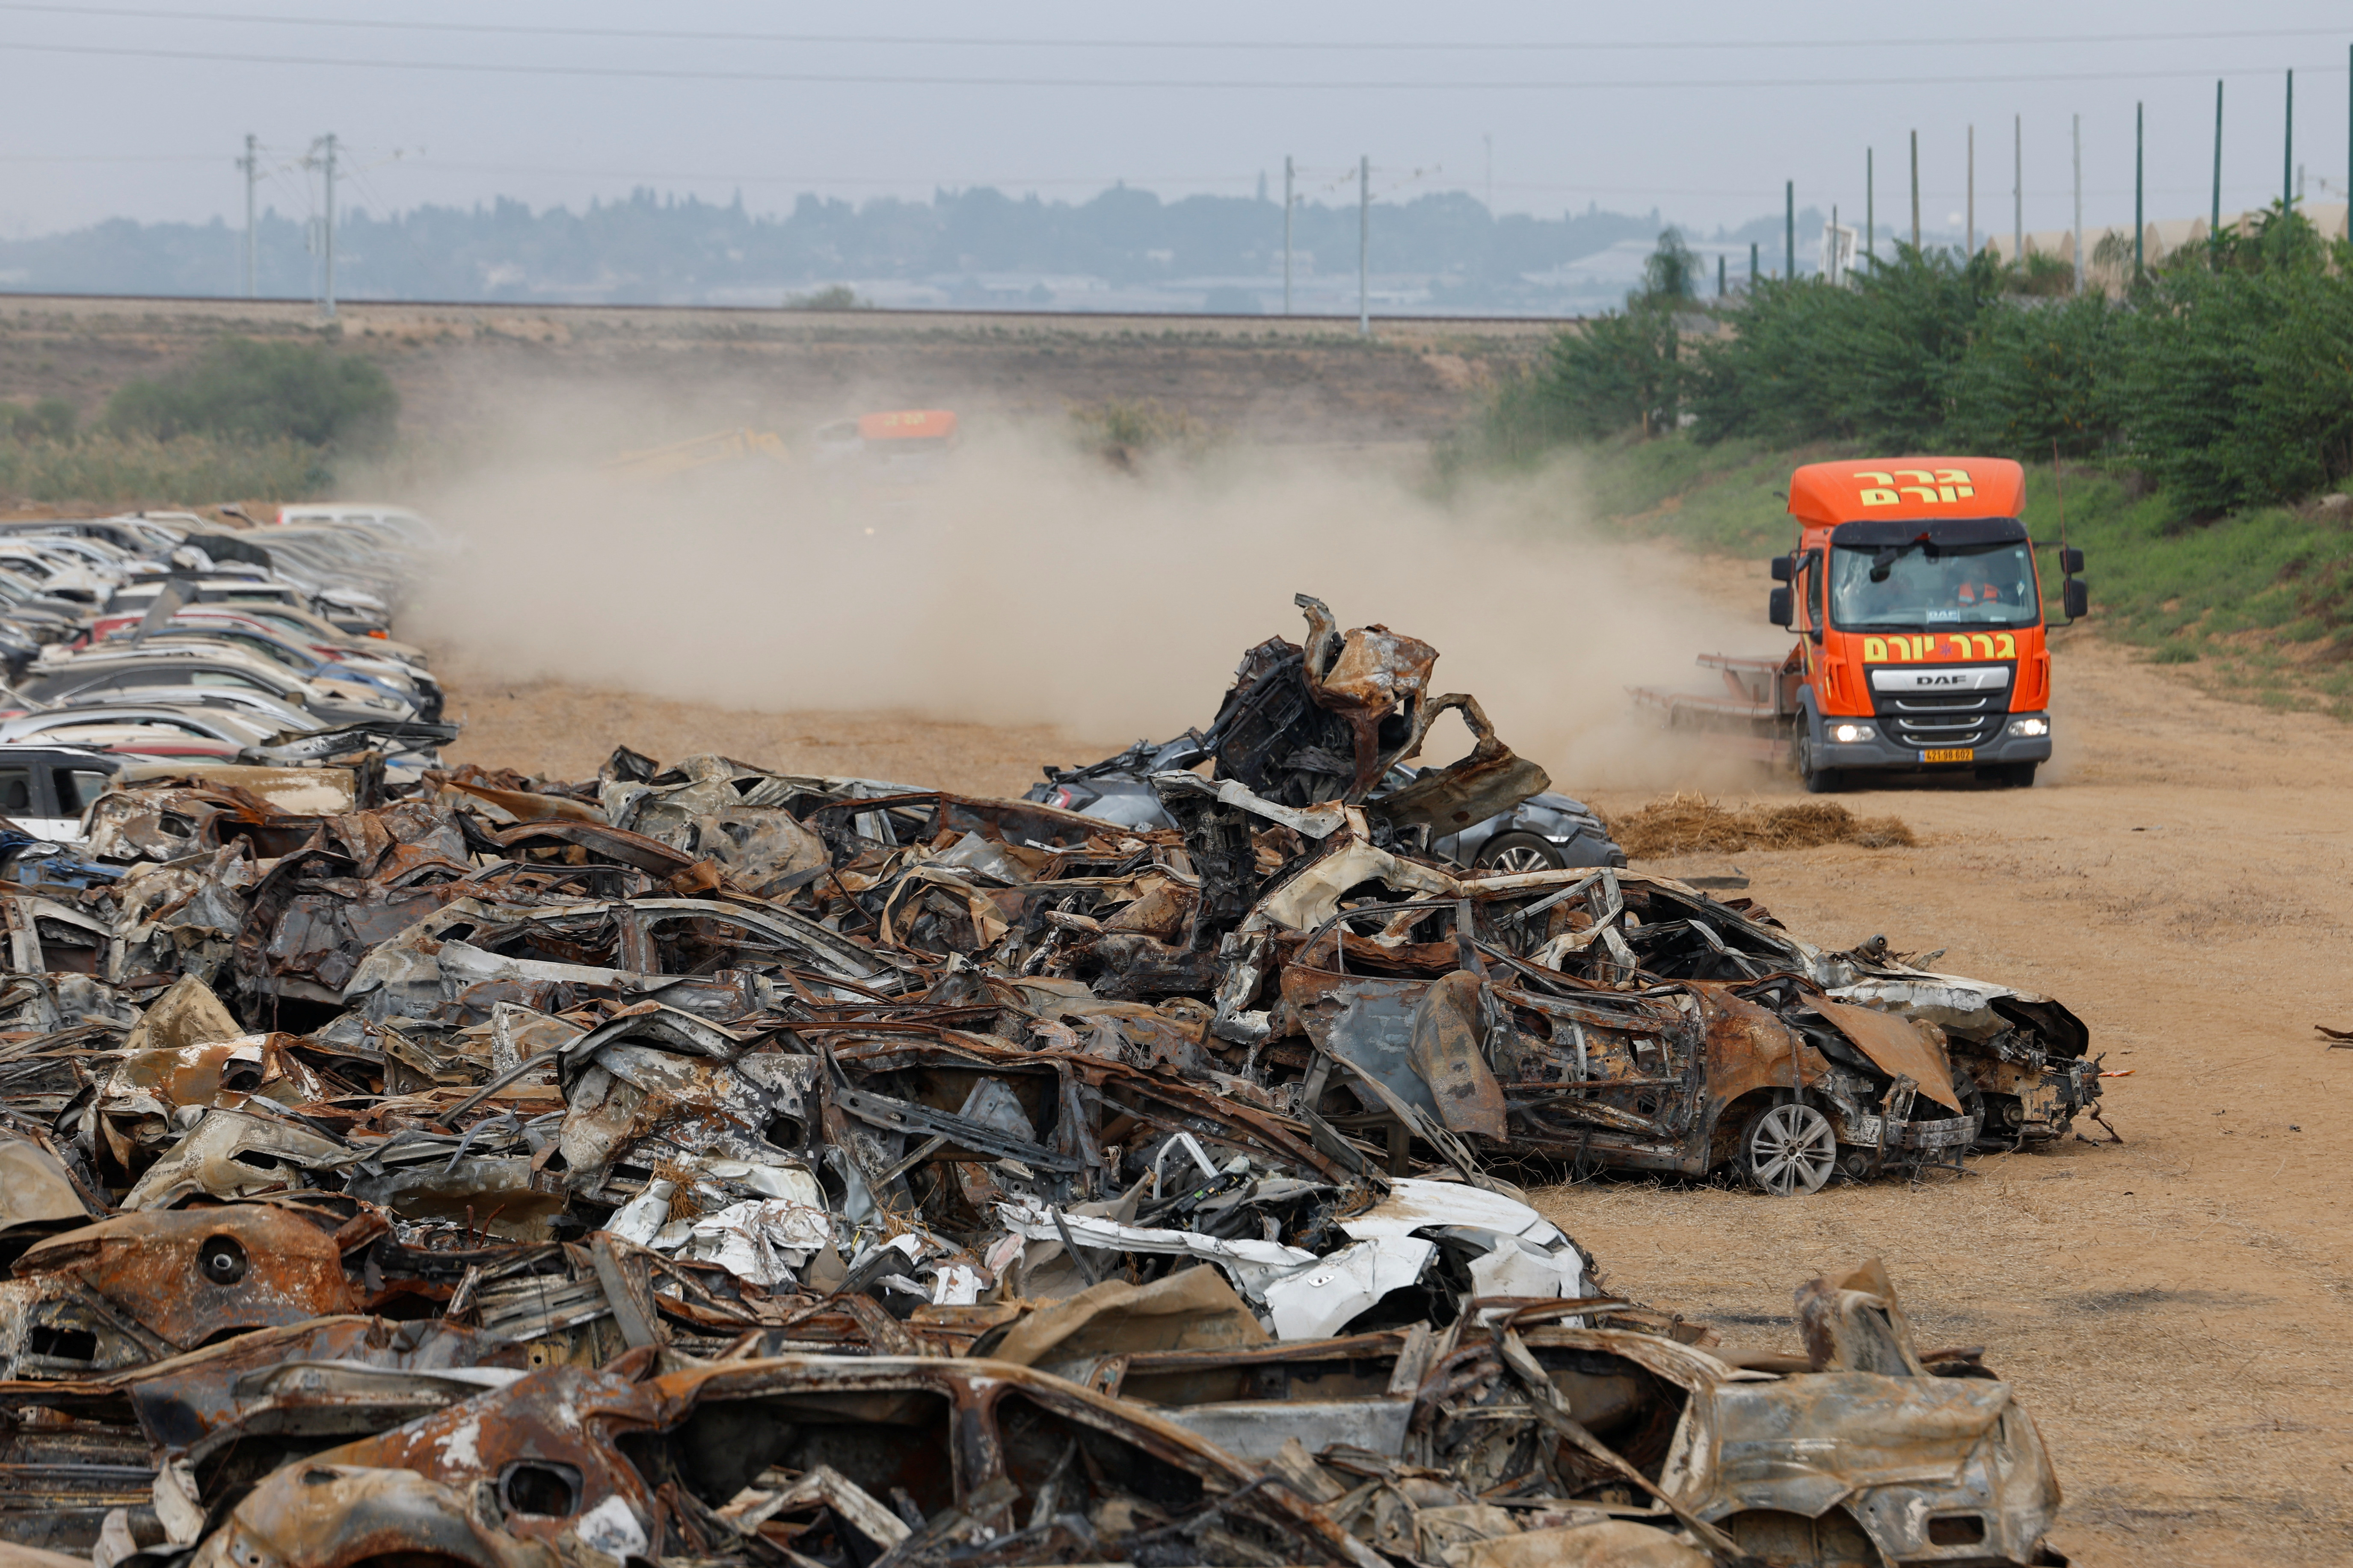 A view of vehicles destroyed by Hamas during the October 7 attack on Israel, collected in a field near the Israel-Gaza border